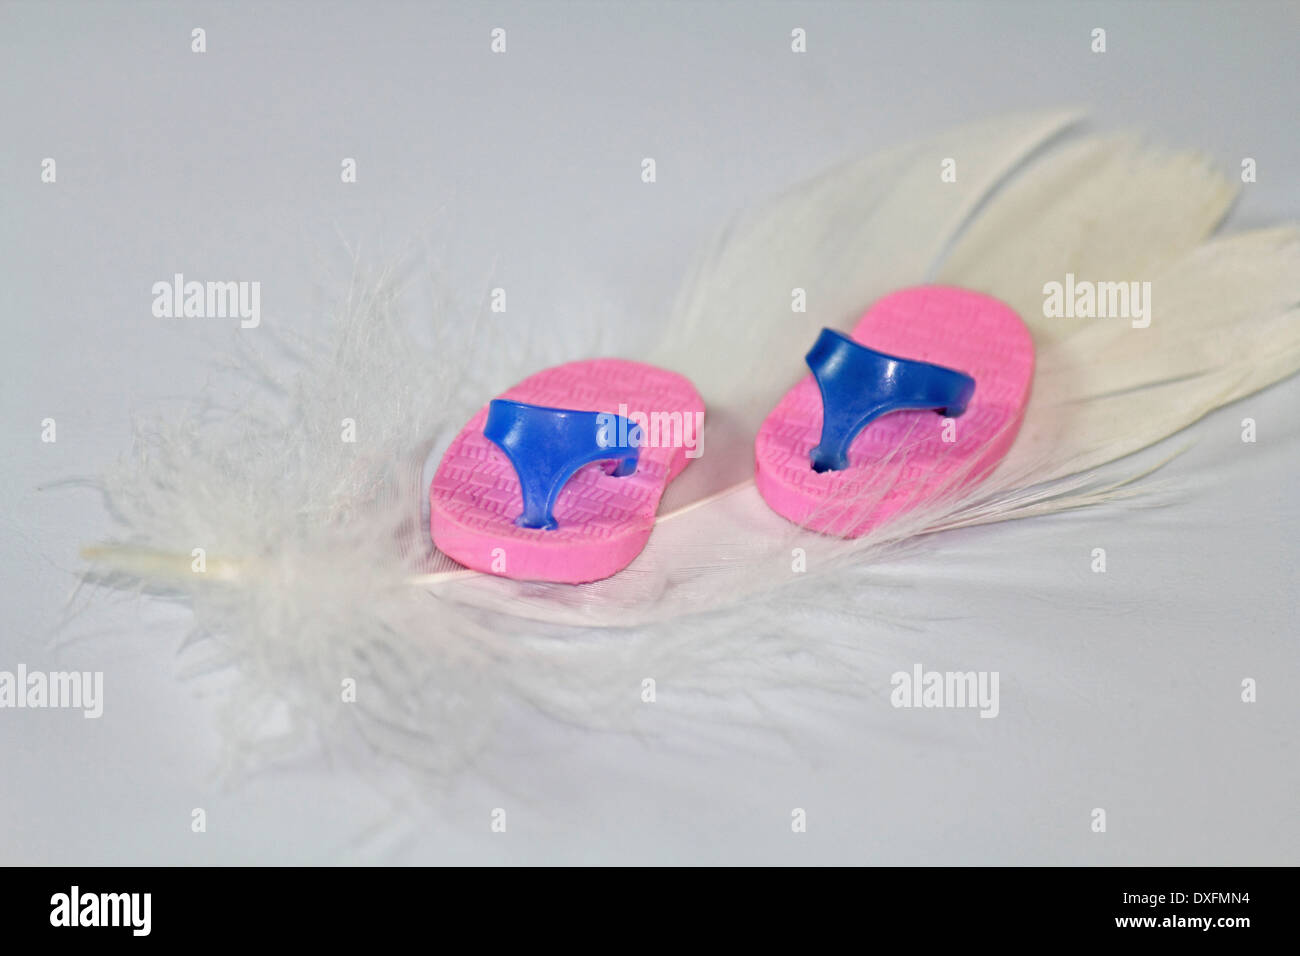 Miniature rubber slippers on feather Stock Photo - Alamy